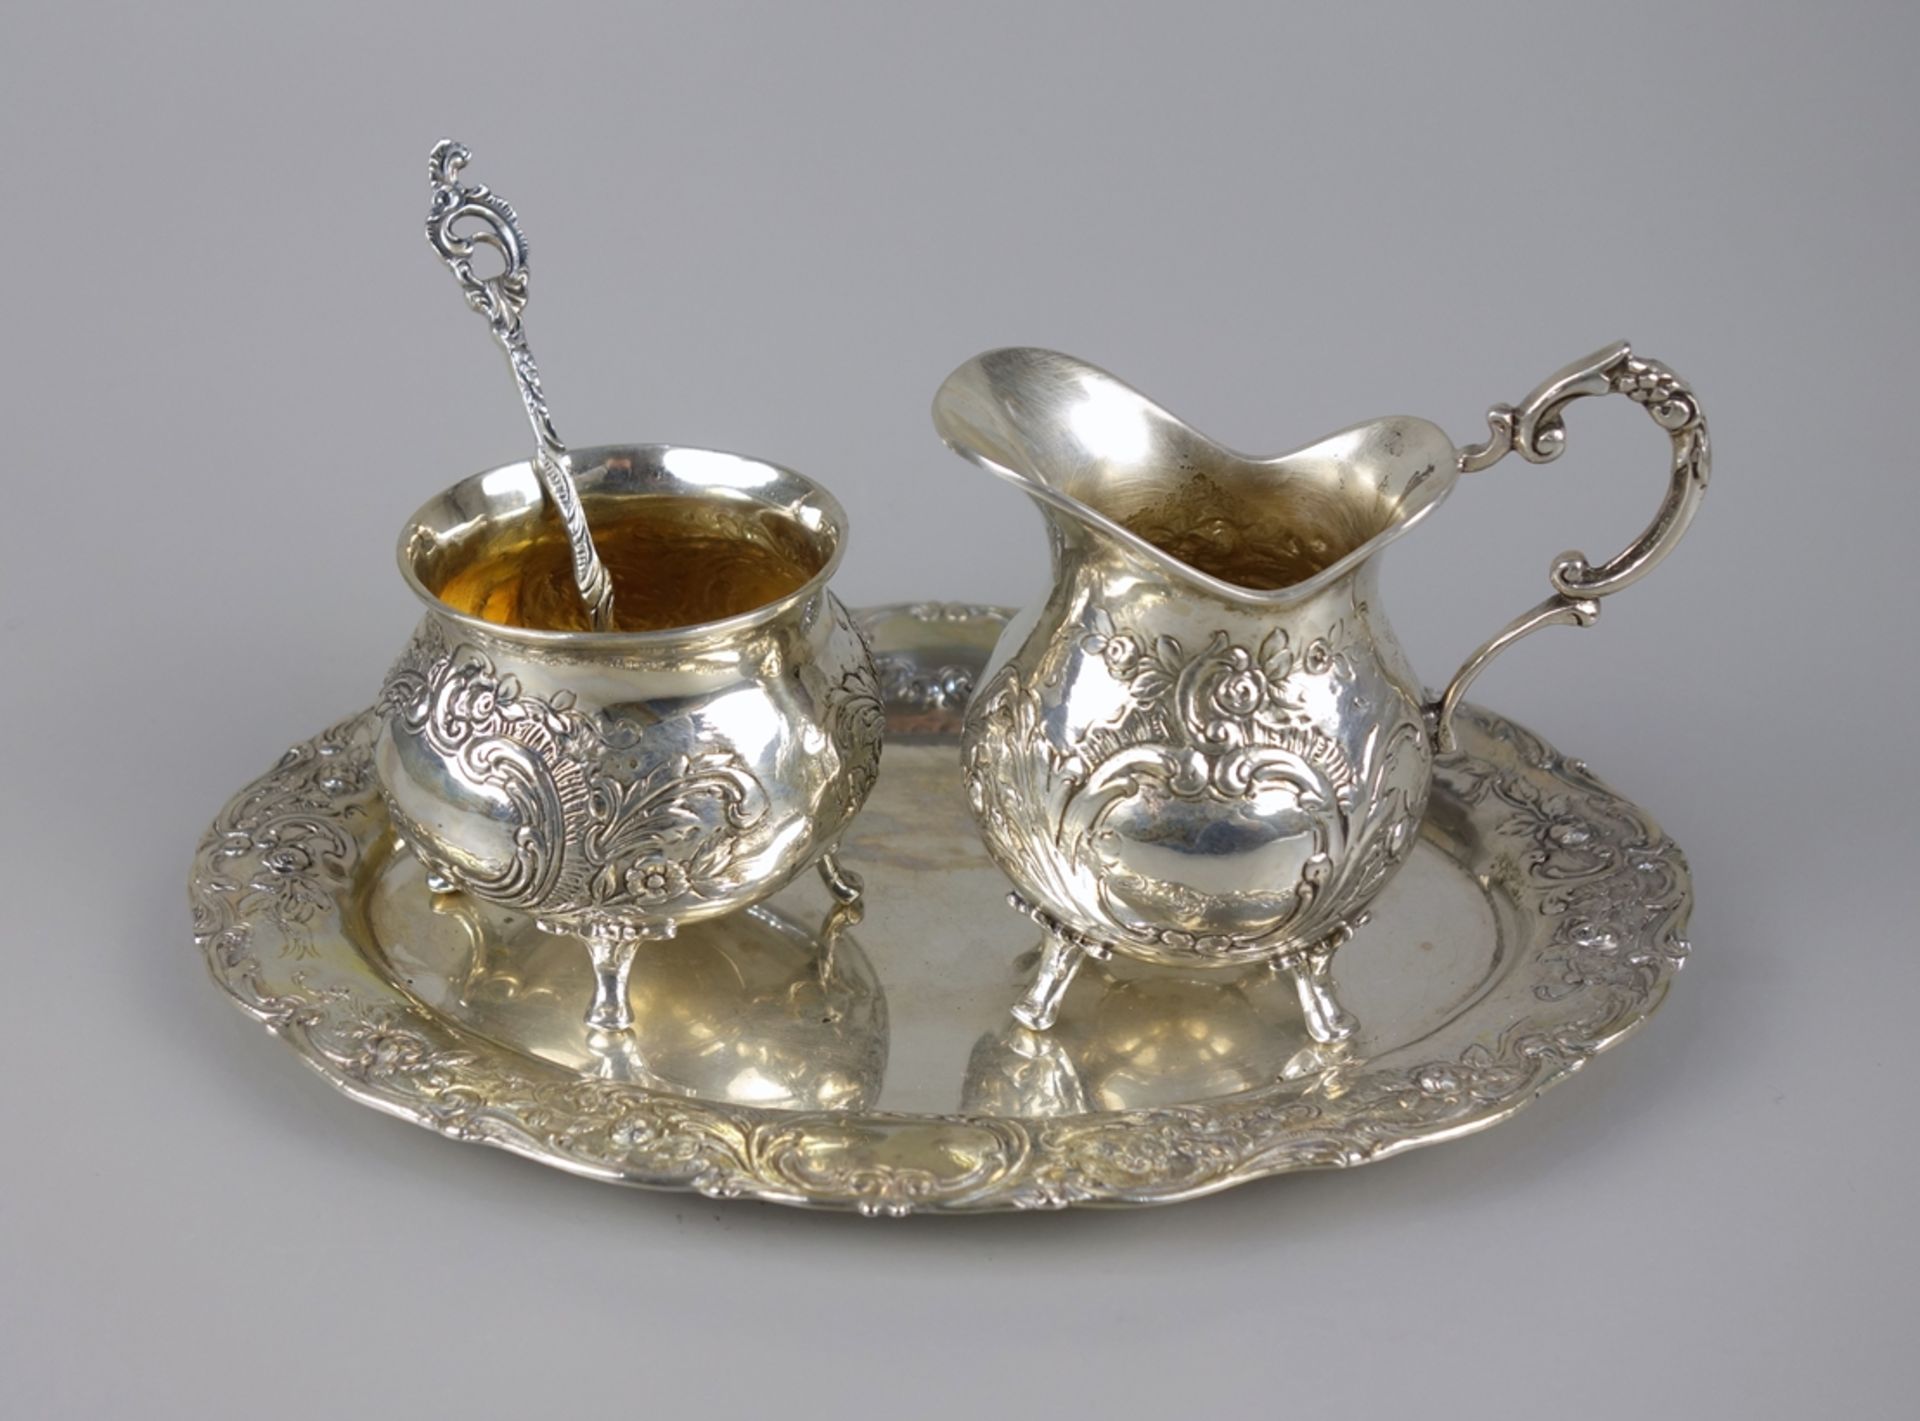 Cream pourer and sugar bowl with tray, floral rolled decoration, Christoph Widmann, 835 silver